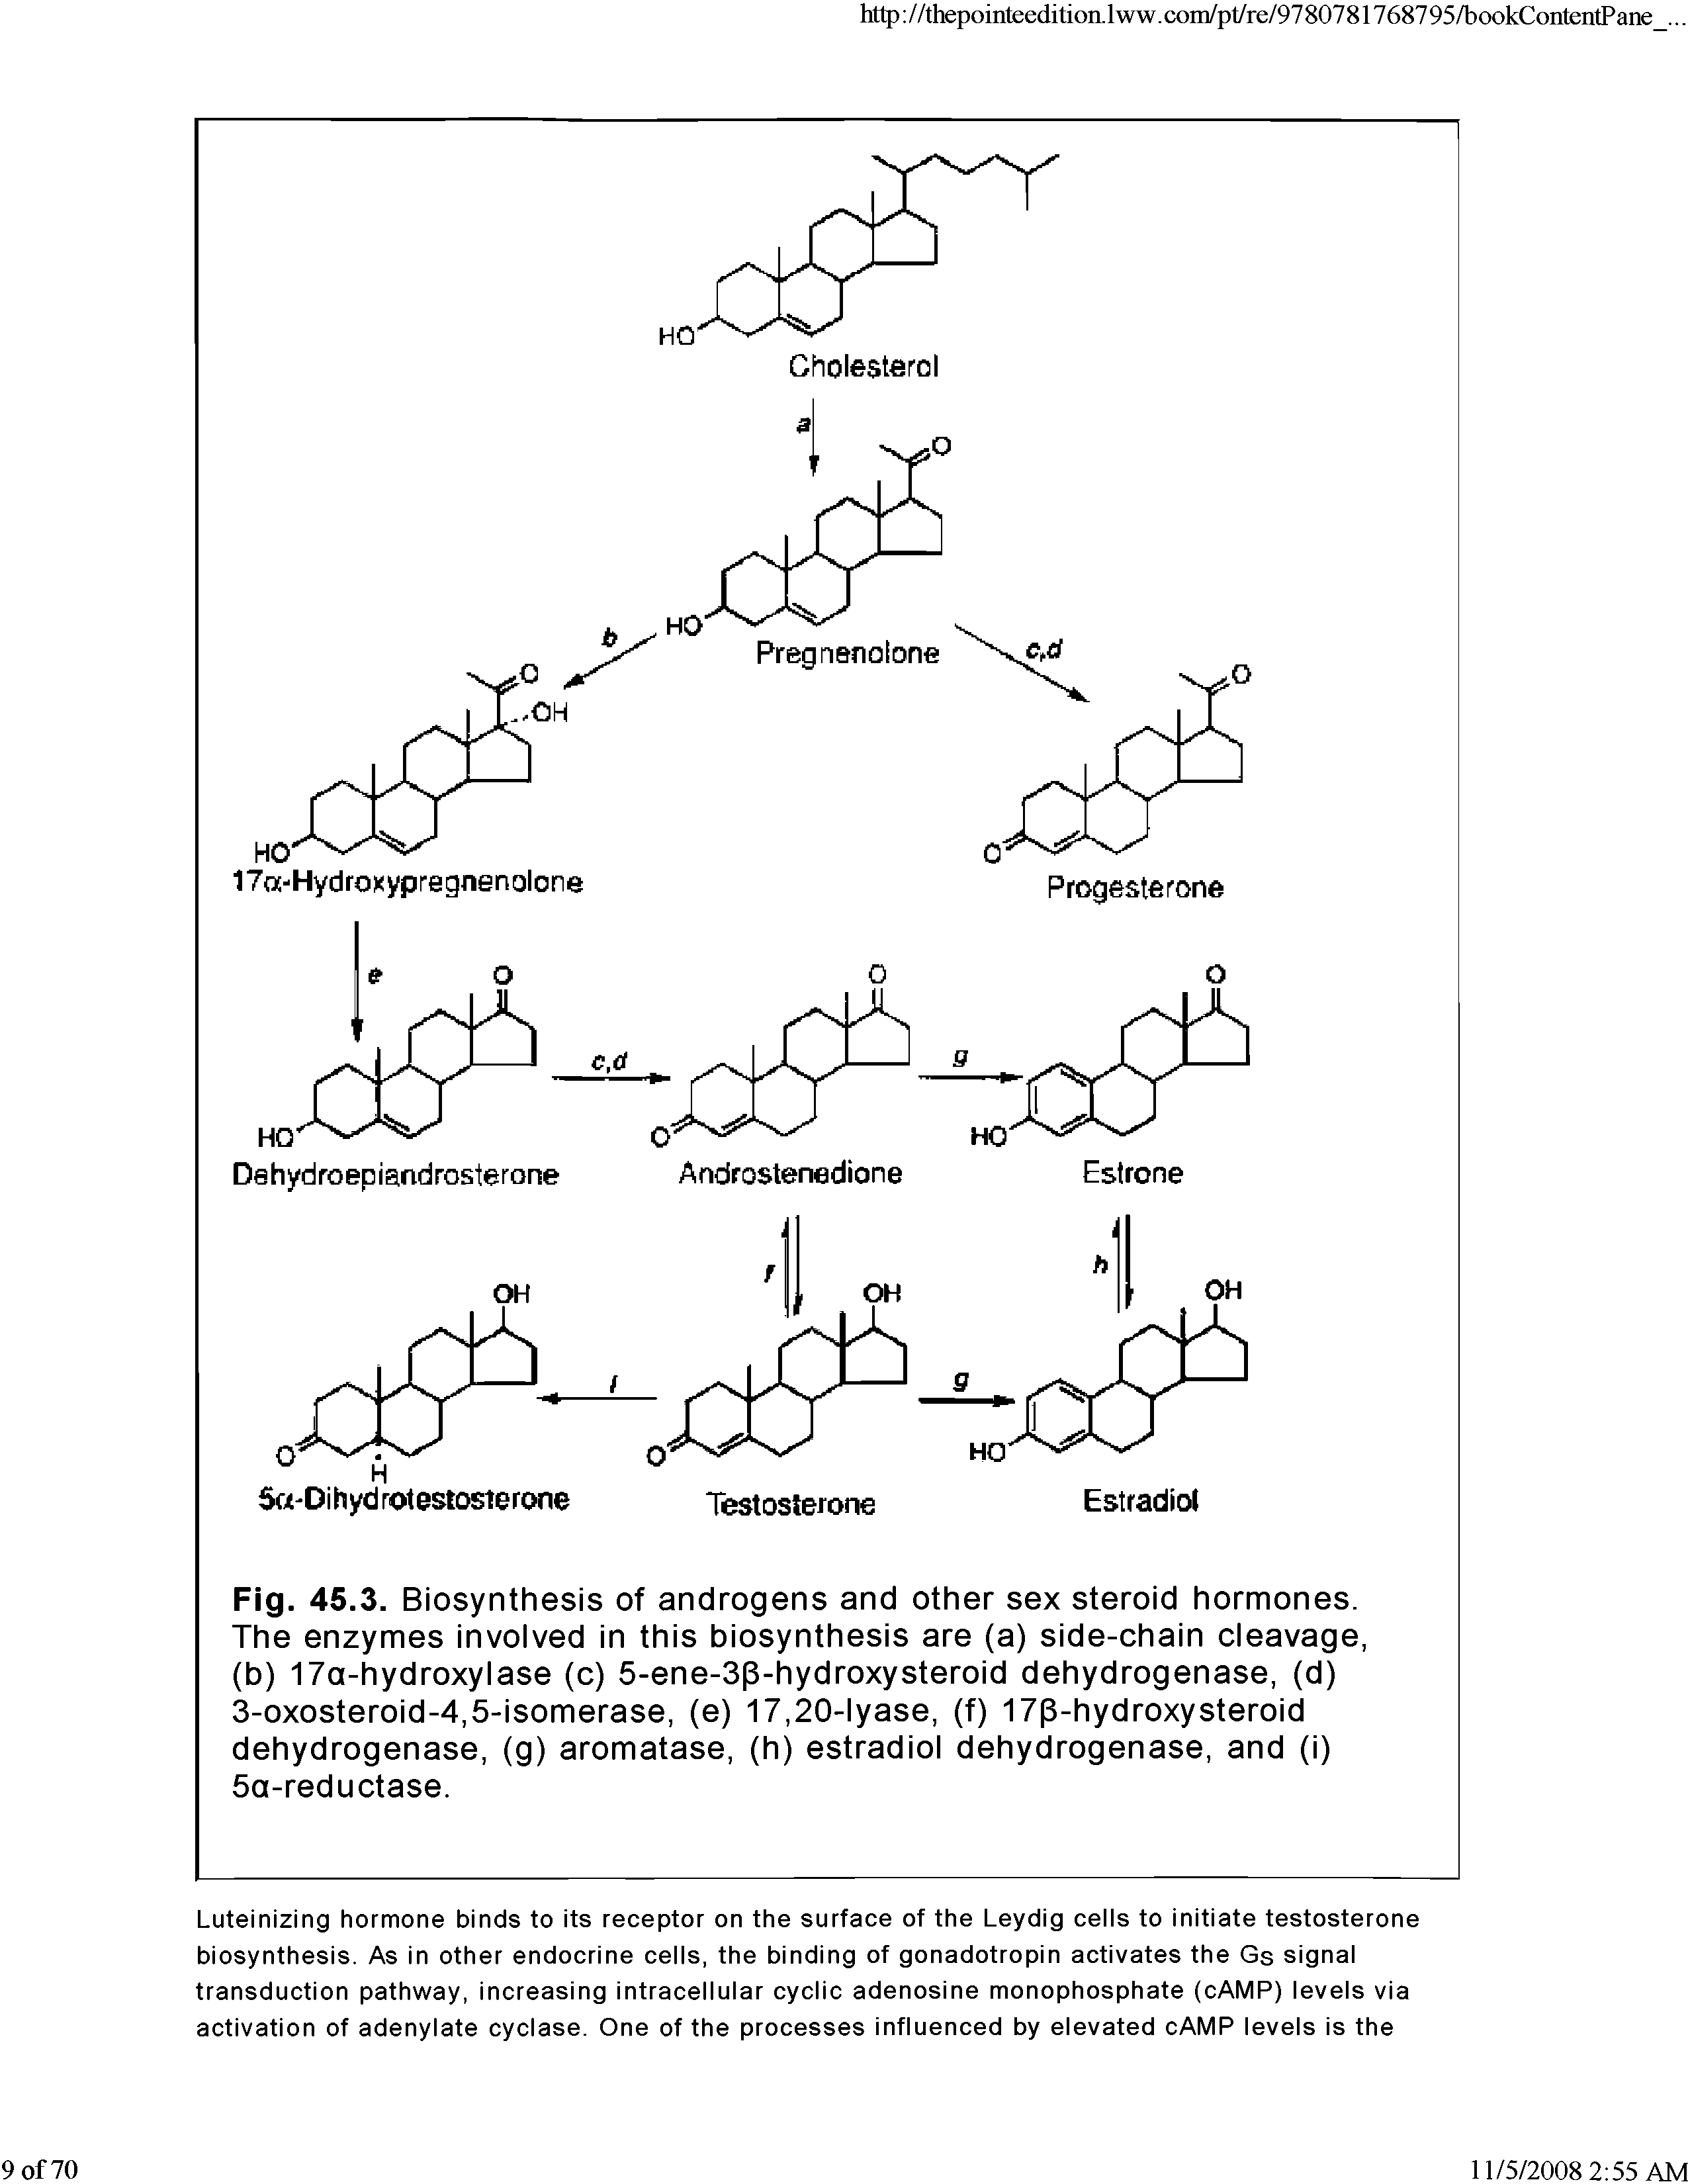 Fig. 45.3. Biosynthesis of androgens and other sex steroid hormones. The enzymes involved in this biosynthesis are (a) side-chain cleavage, (b) 17a-hydroxylase (c) 5-ene-3(3-hydroxysteroid dehydrogenase, (d) 3-oxosteroid-4,5-isomerase, (e) 17,20-lyase, (f) 17(3-hydroxysteroid dehydrogenase, (g) aromatase, (h) estradiol dehydrogenase, and (i) 5a-reductase.